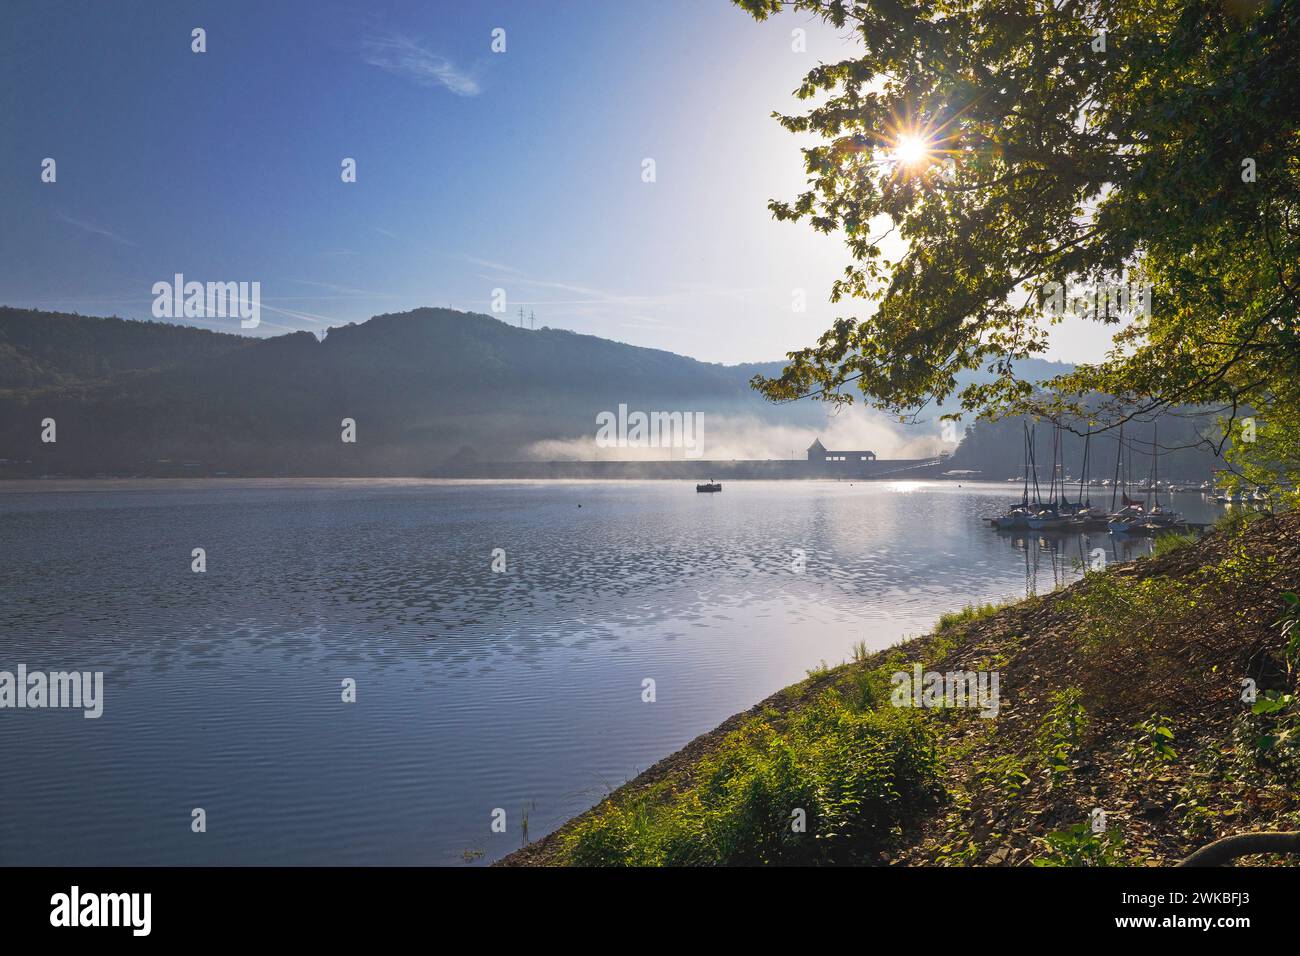 Eder dam with the dam wall in morning light, Germany, Hesse, Edertal Stock Photo